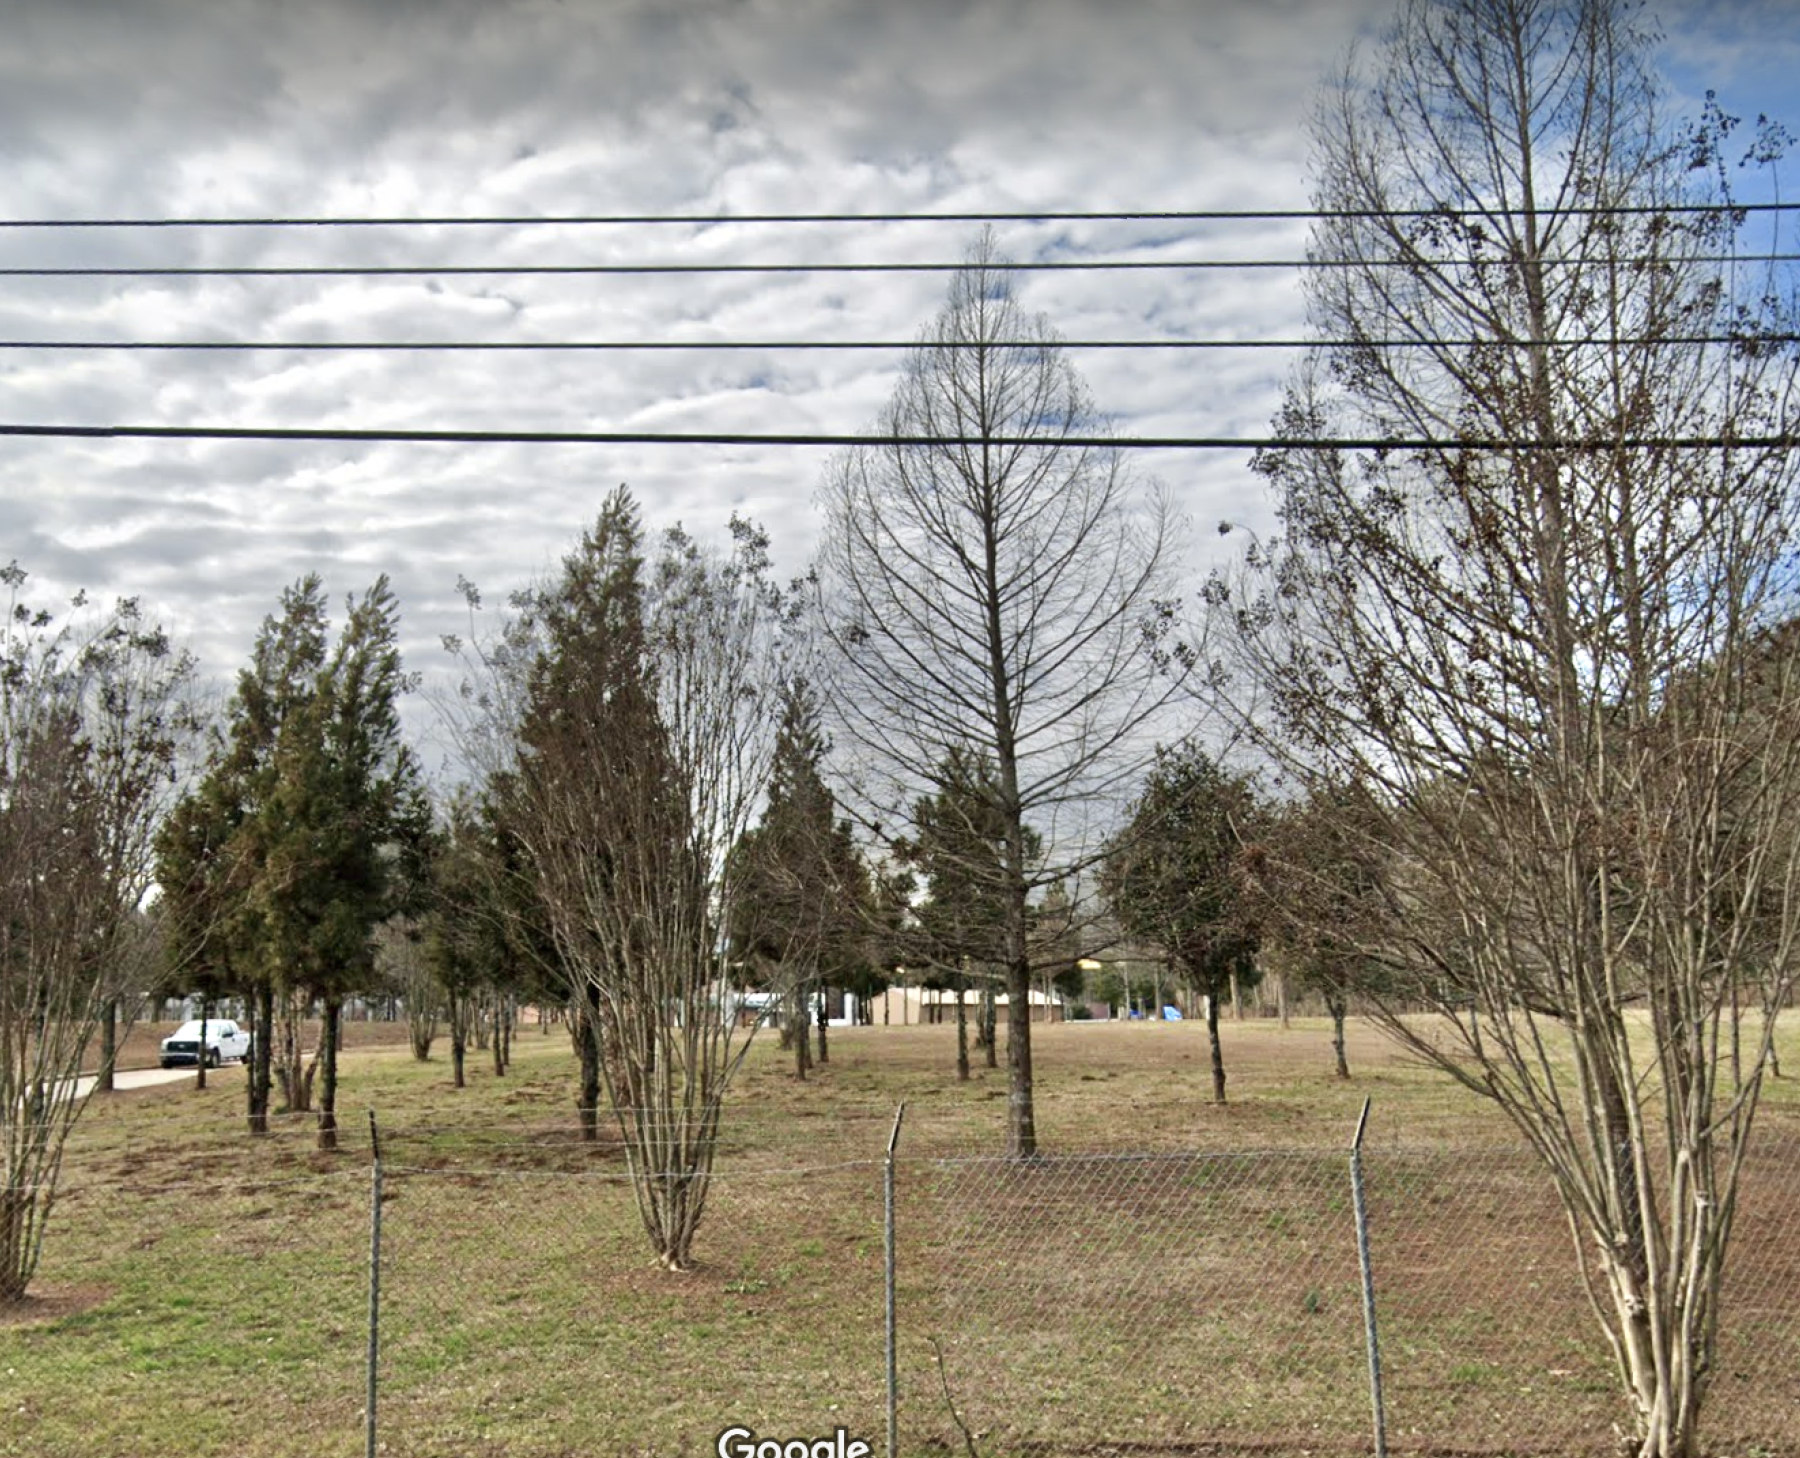 Beyond a chain-link fence, a clipped lawn is scattered with trees which reach toward powerlines. The composition and placement of plantings gives an unnatural appearance to this landscape.